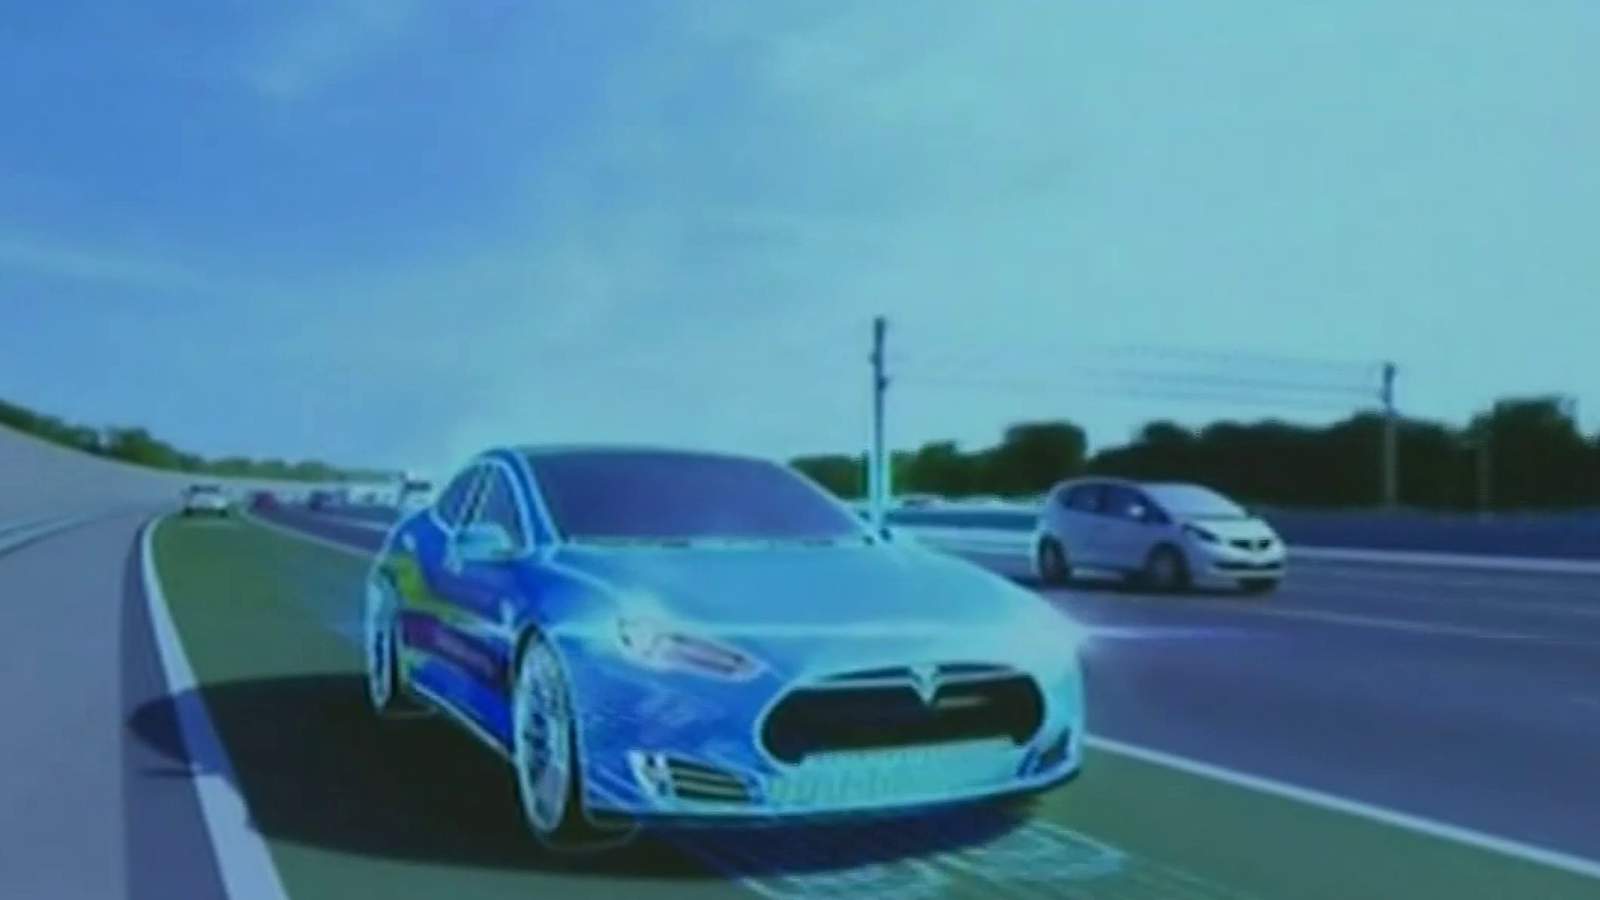 Could road electrification to charge vehicles while driving come to Central Florida?